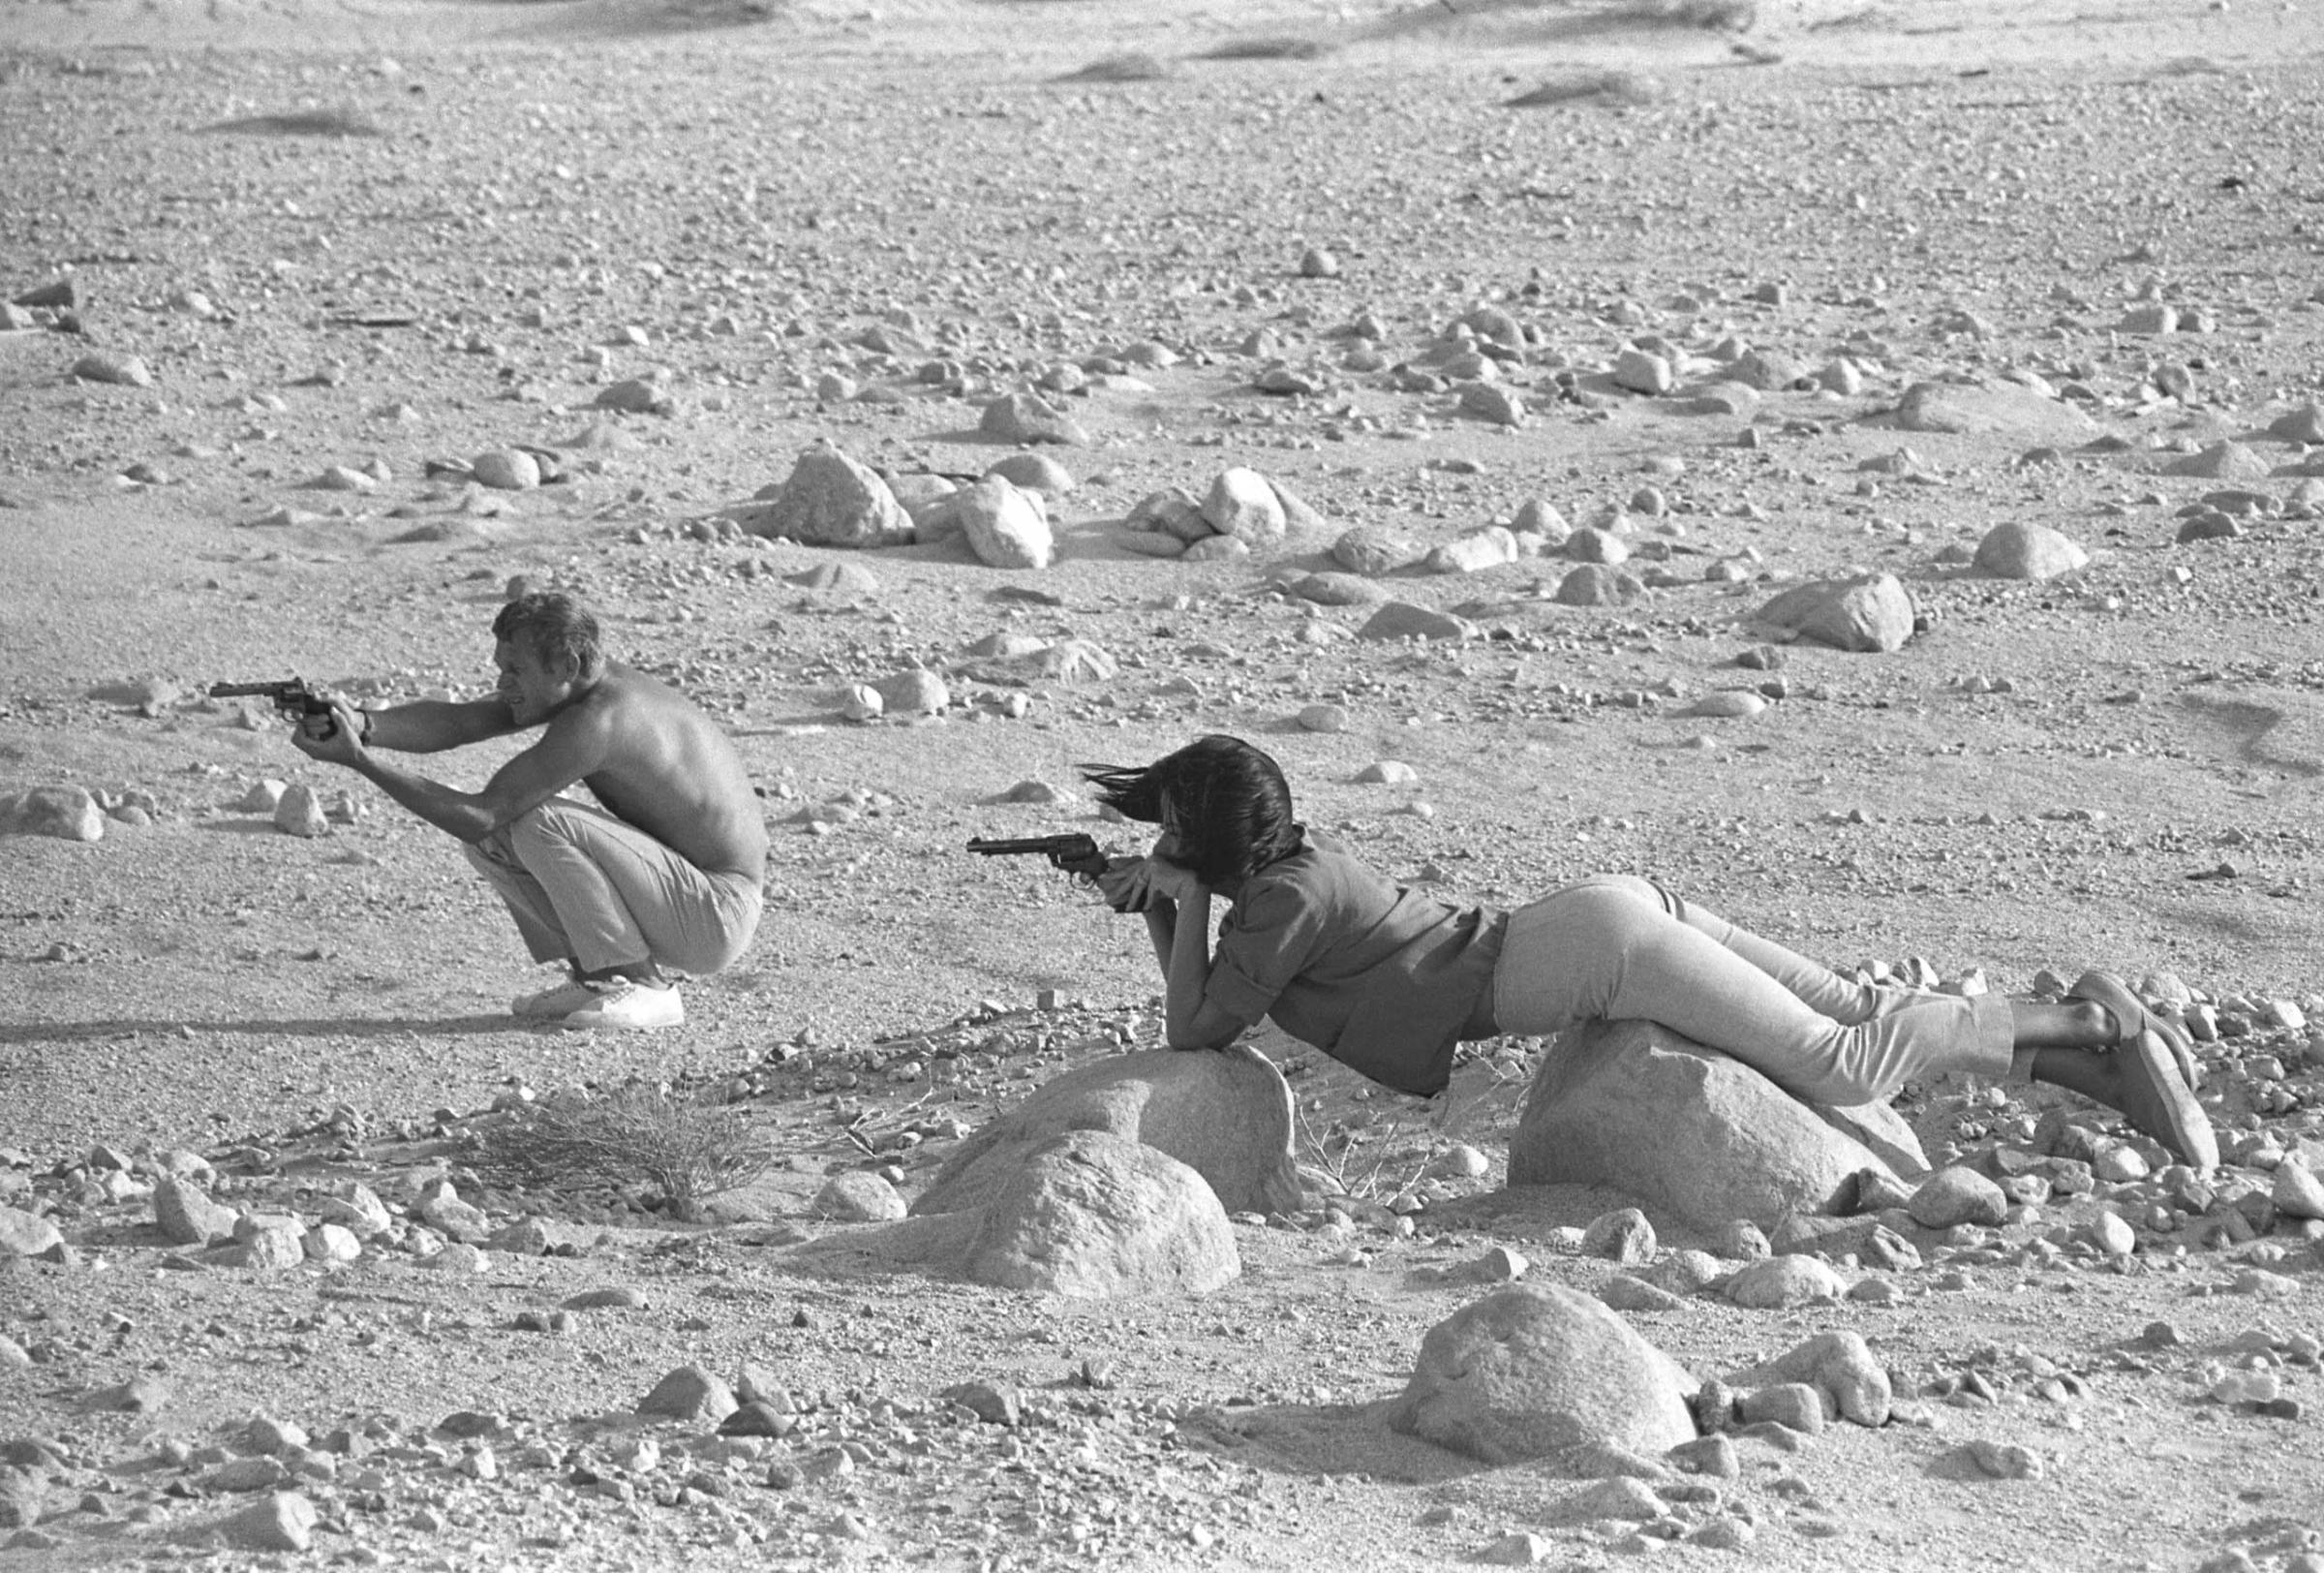 Steve McQueen and Neile Adams, his first wife, target-practice with their pistols in the California desert, 1963.